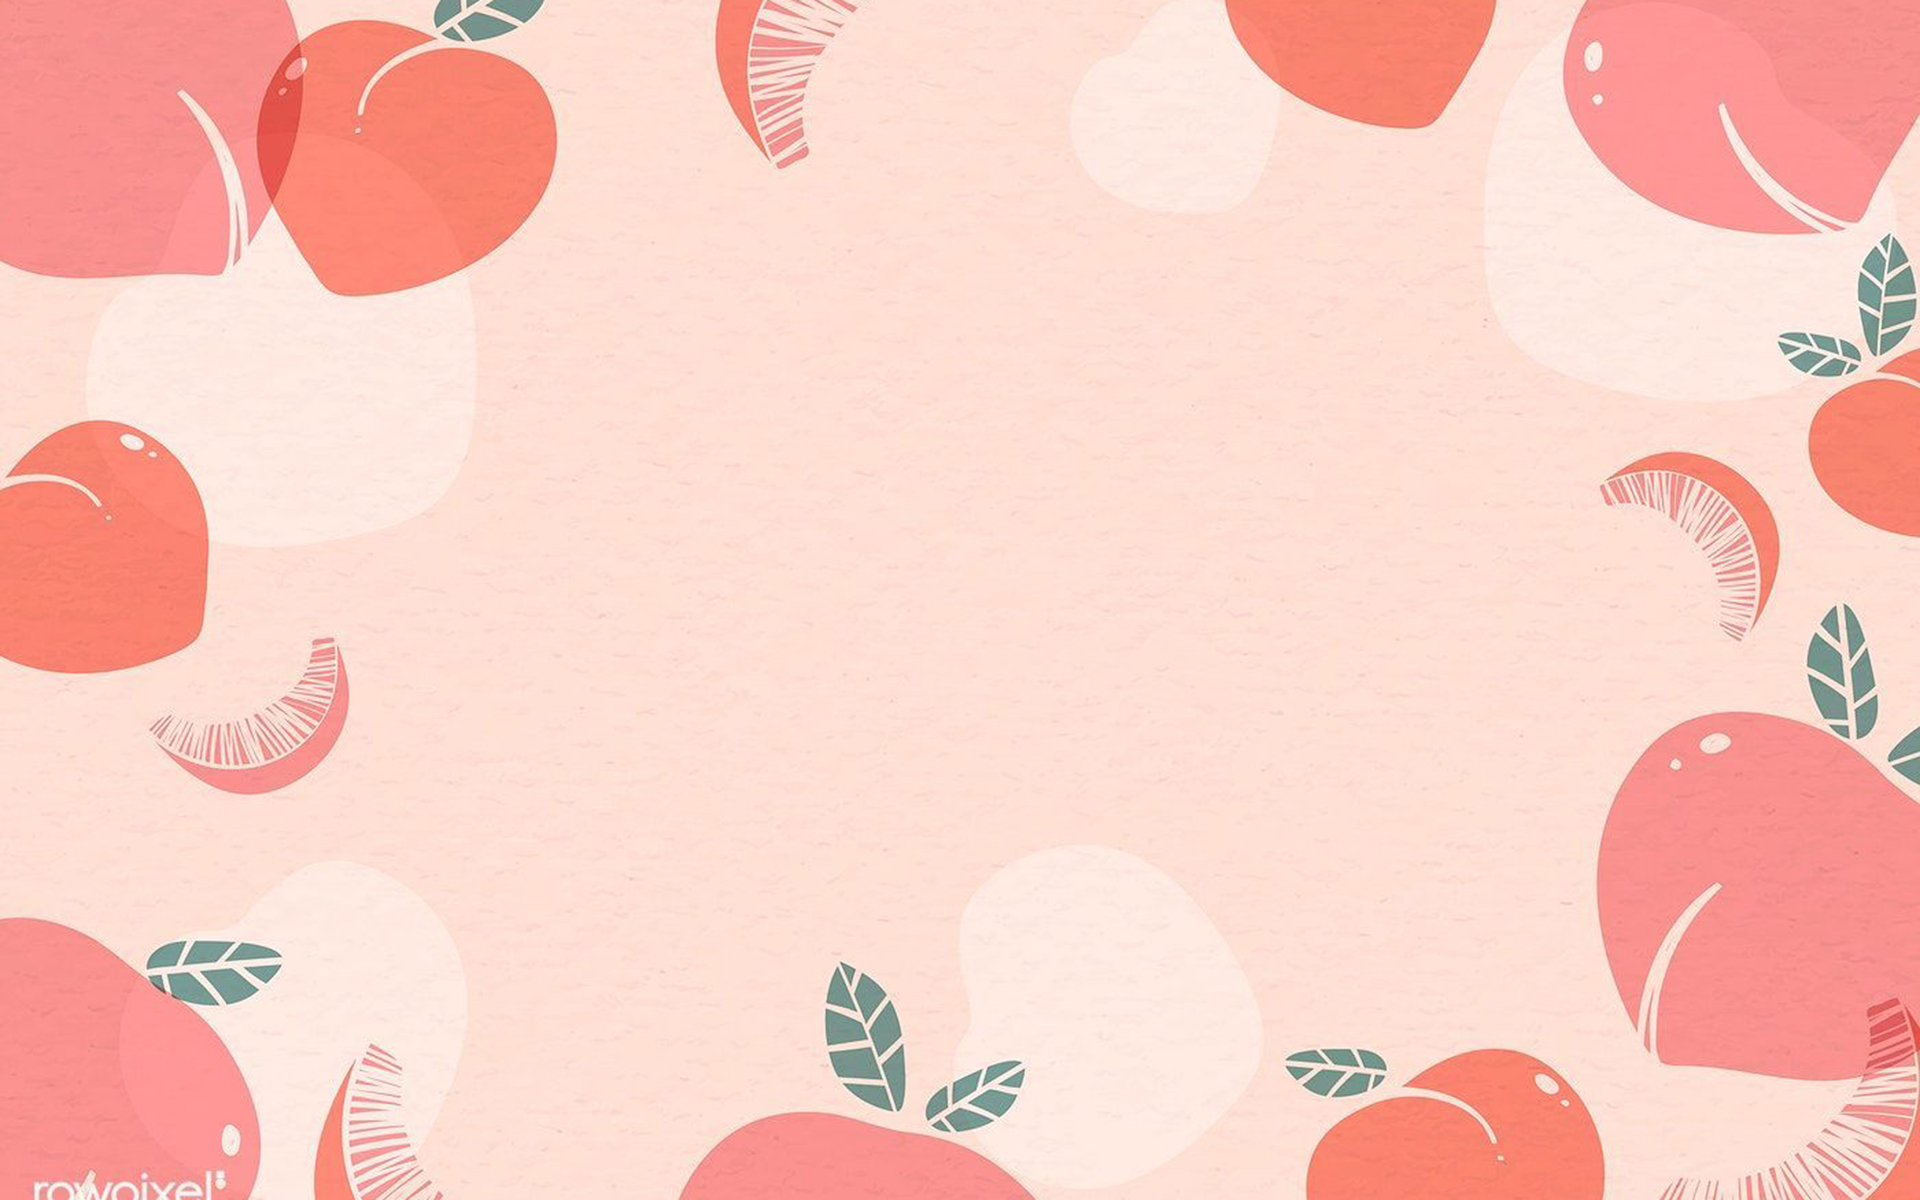 Hand drawn peach patterned background  free image by rawpixelcom   marinemynt  Peach wallpaper Cute wallpapers for ipad Simple iphone  wallpaper